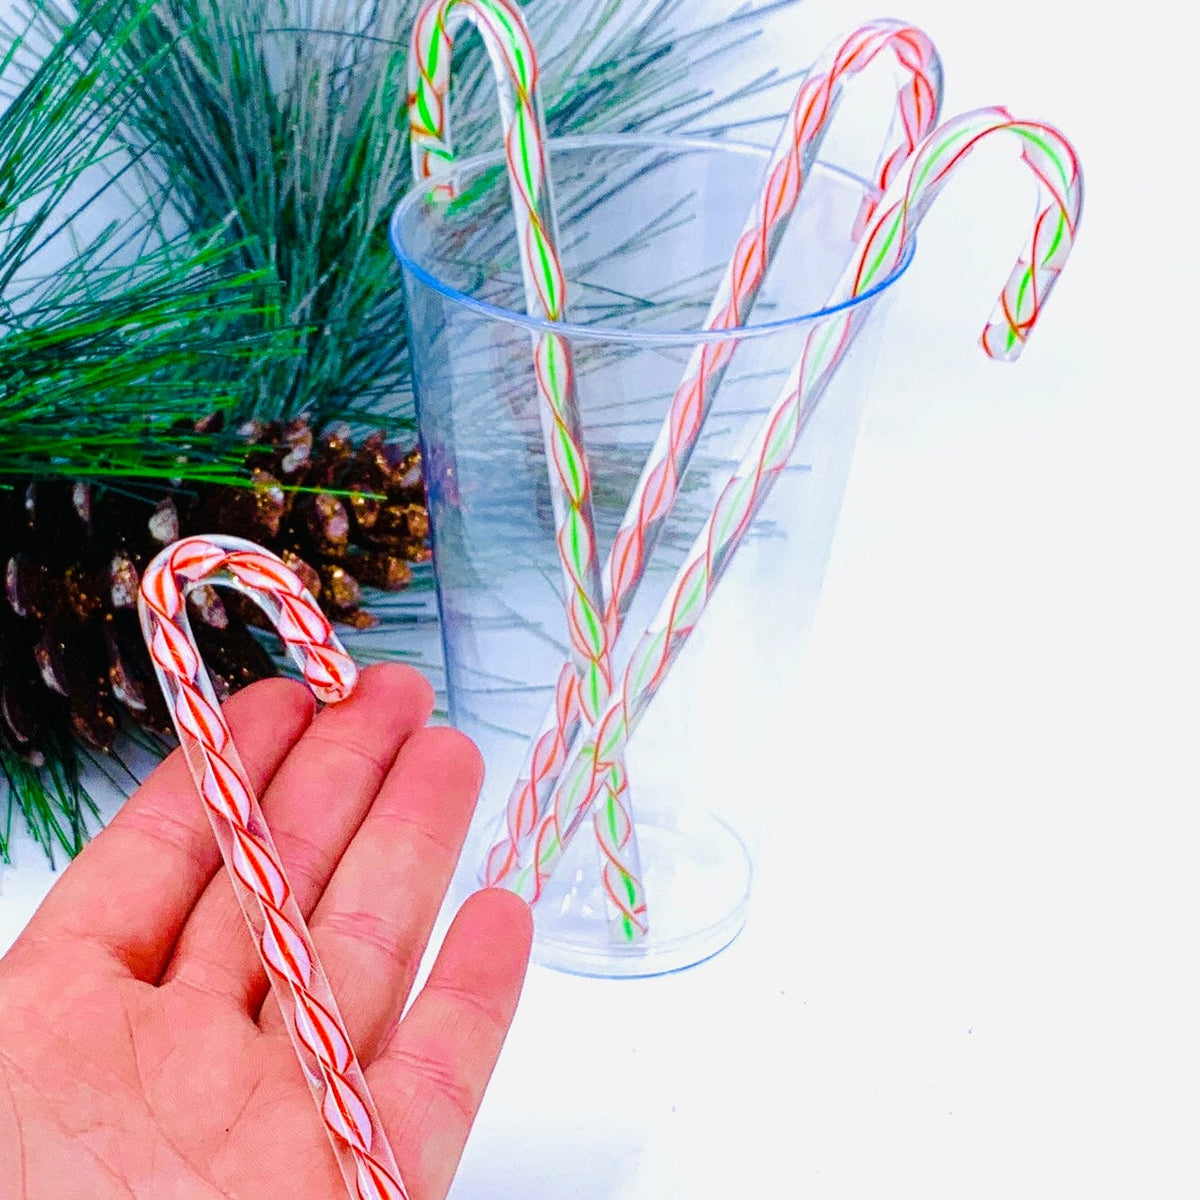 Candy Cane Swizzle Sticks 39 Ornament One Hundred 80 Degrees 